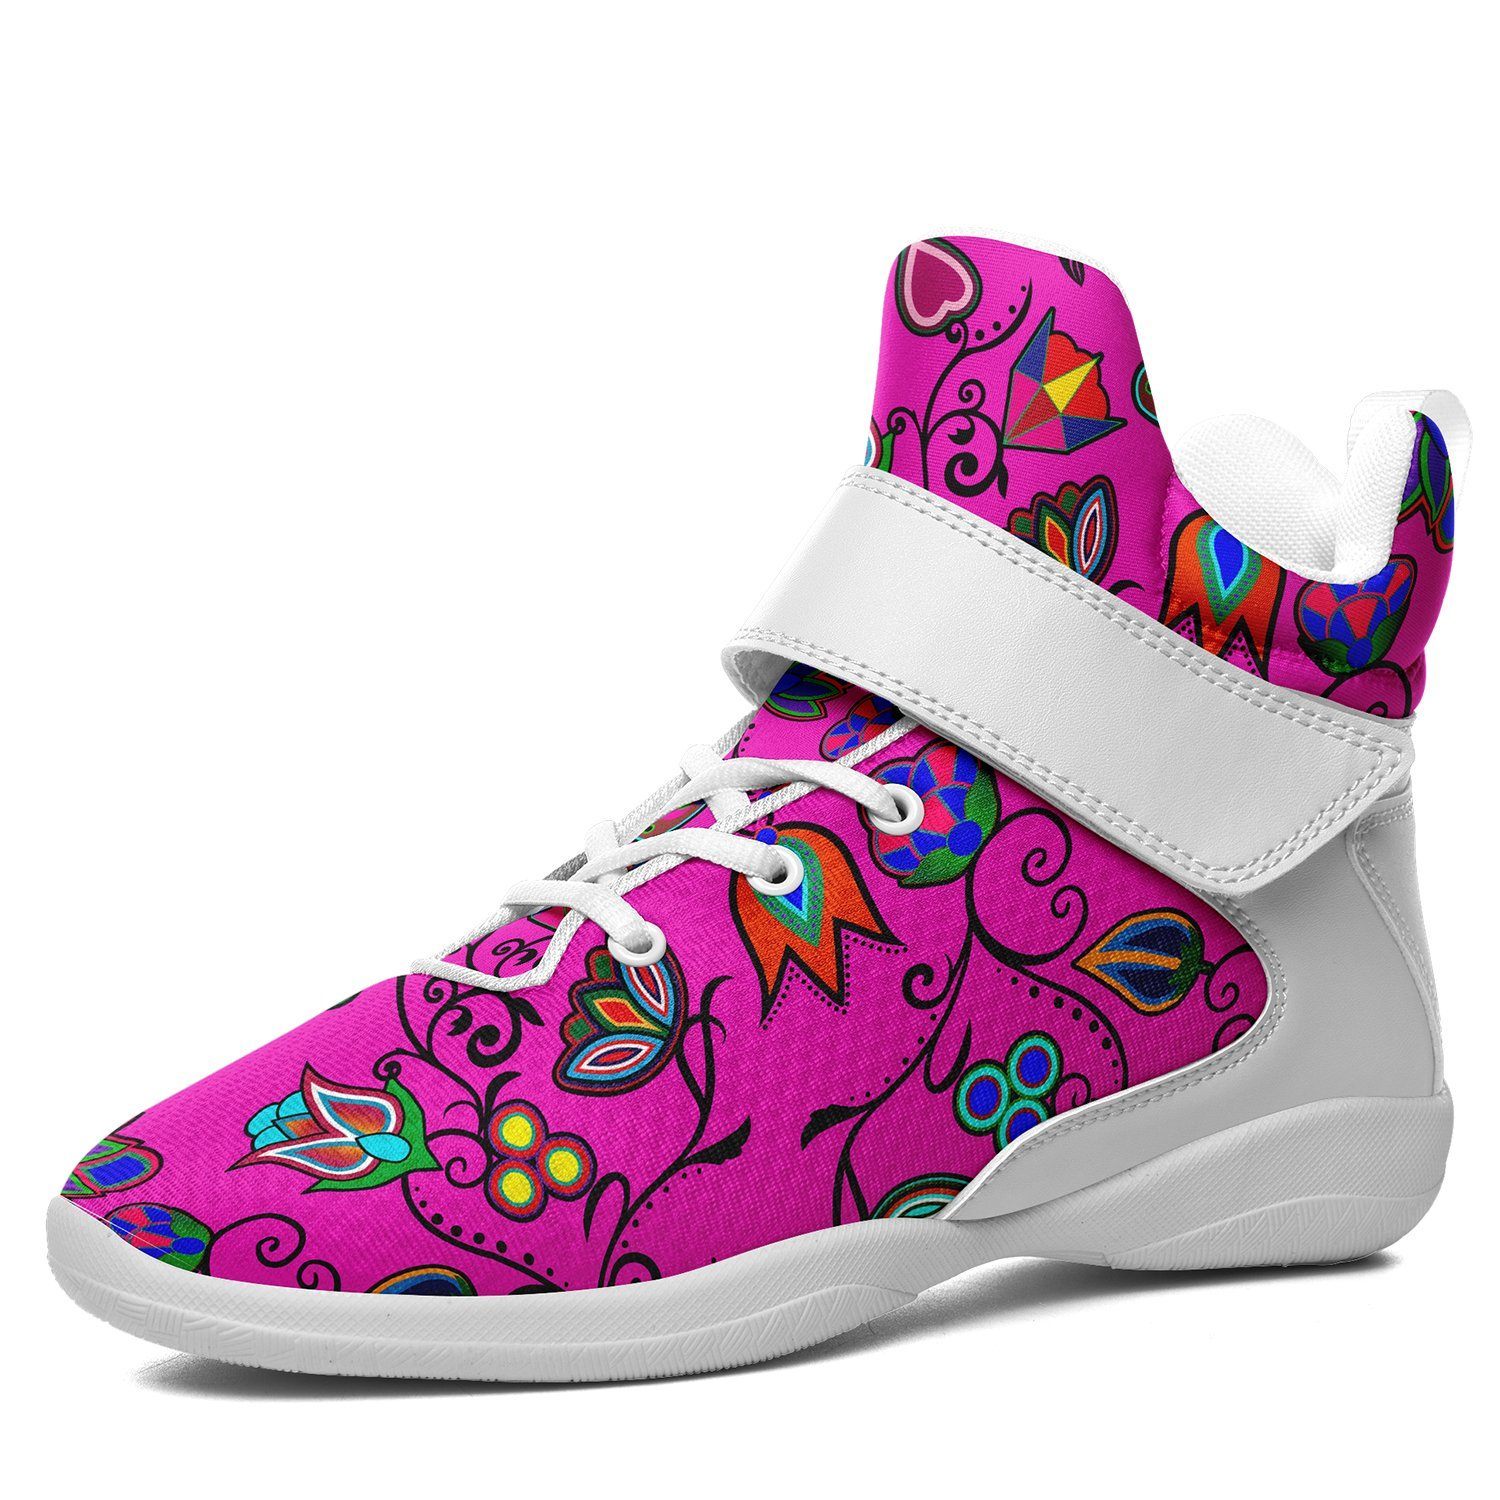 Indigenous Paisley Kid's Ipottaa Basketball / Sport High Top Shoes 49 Dzine US Child 12.5 / EUR 30 White Sole with White Strap 